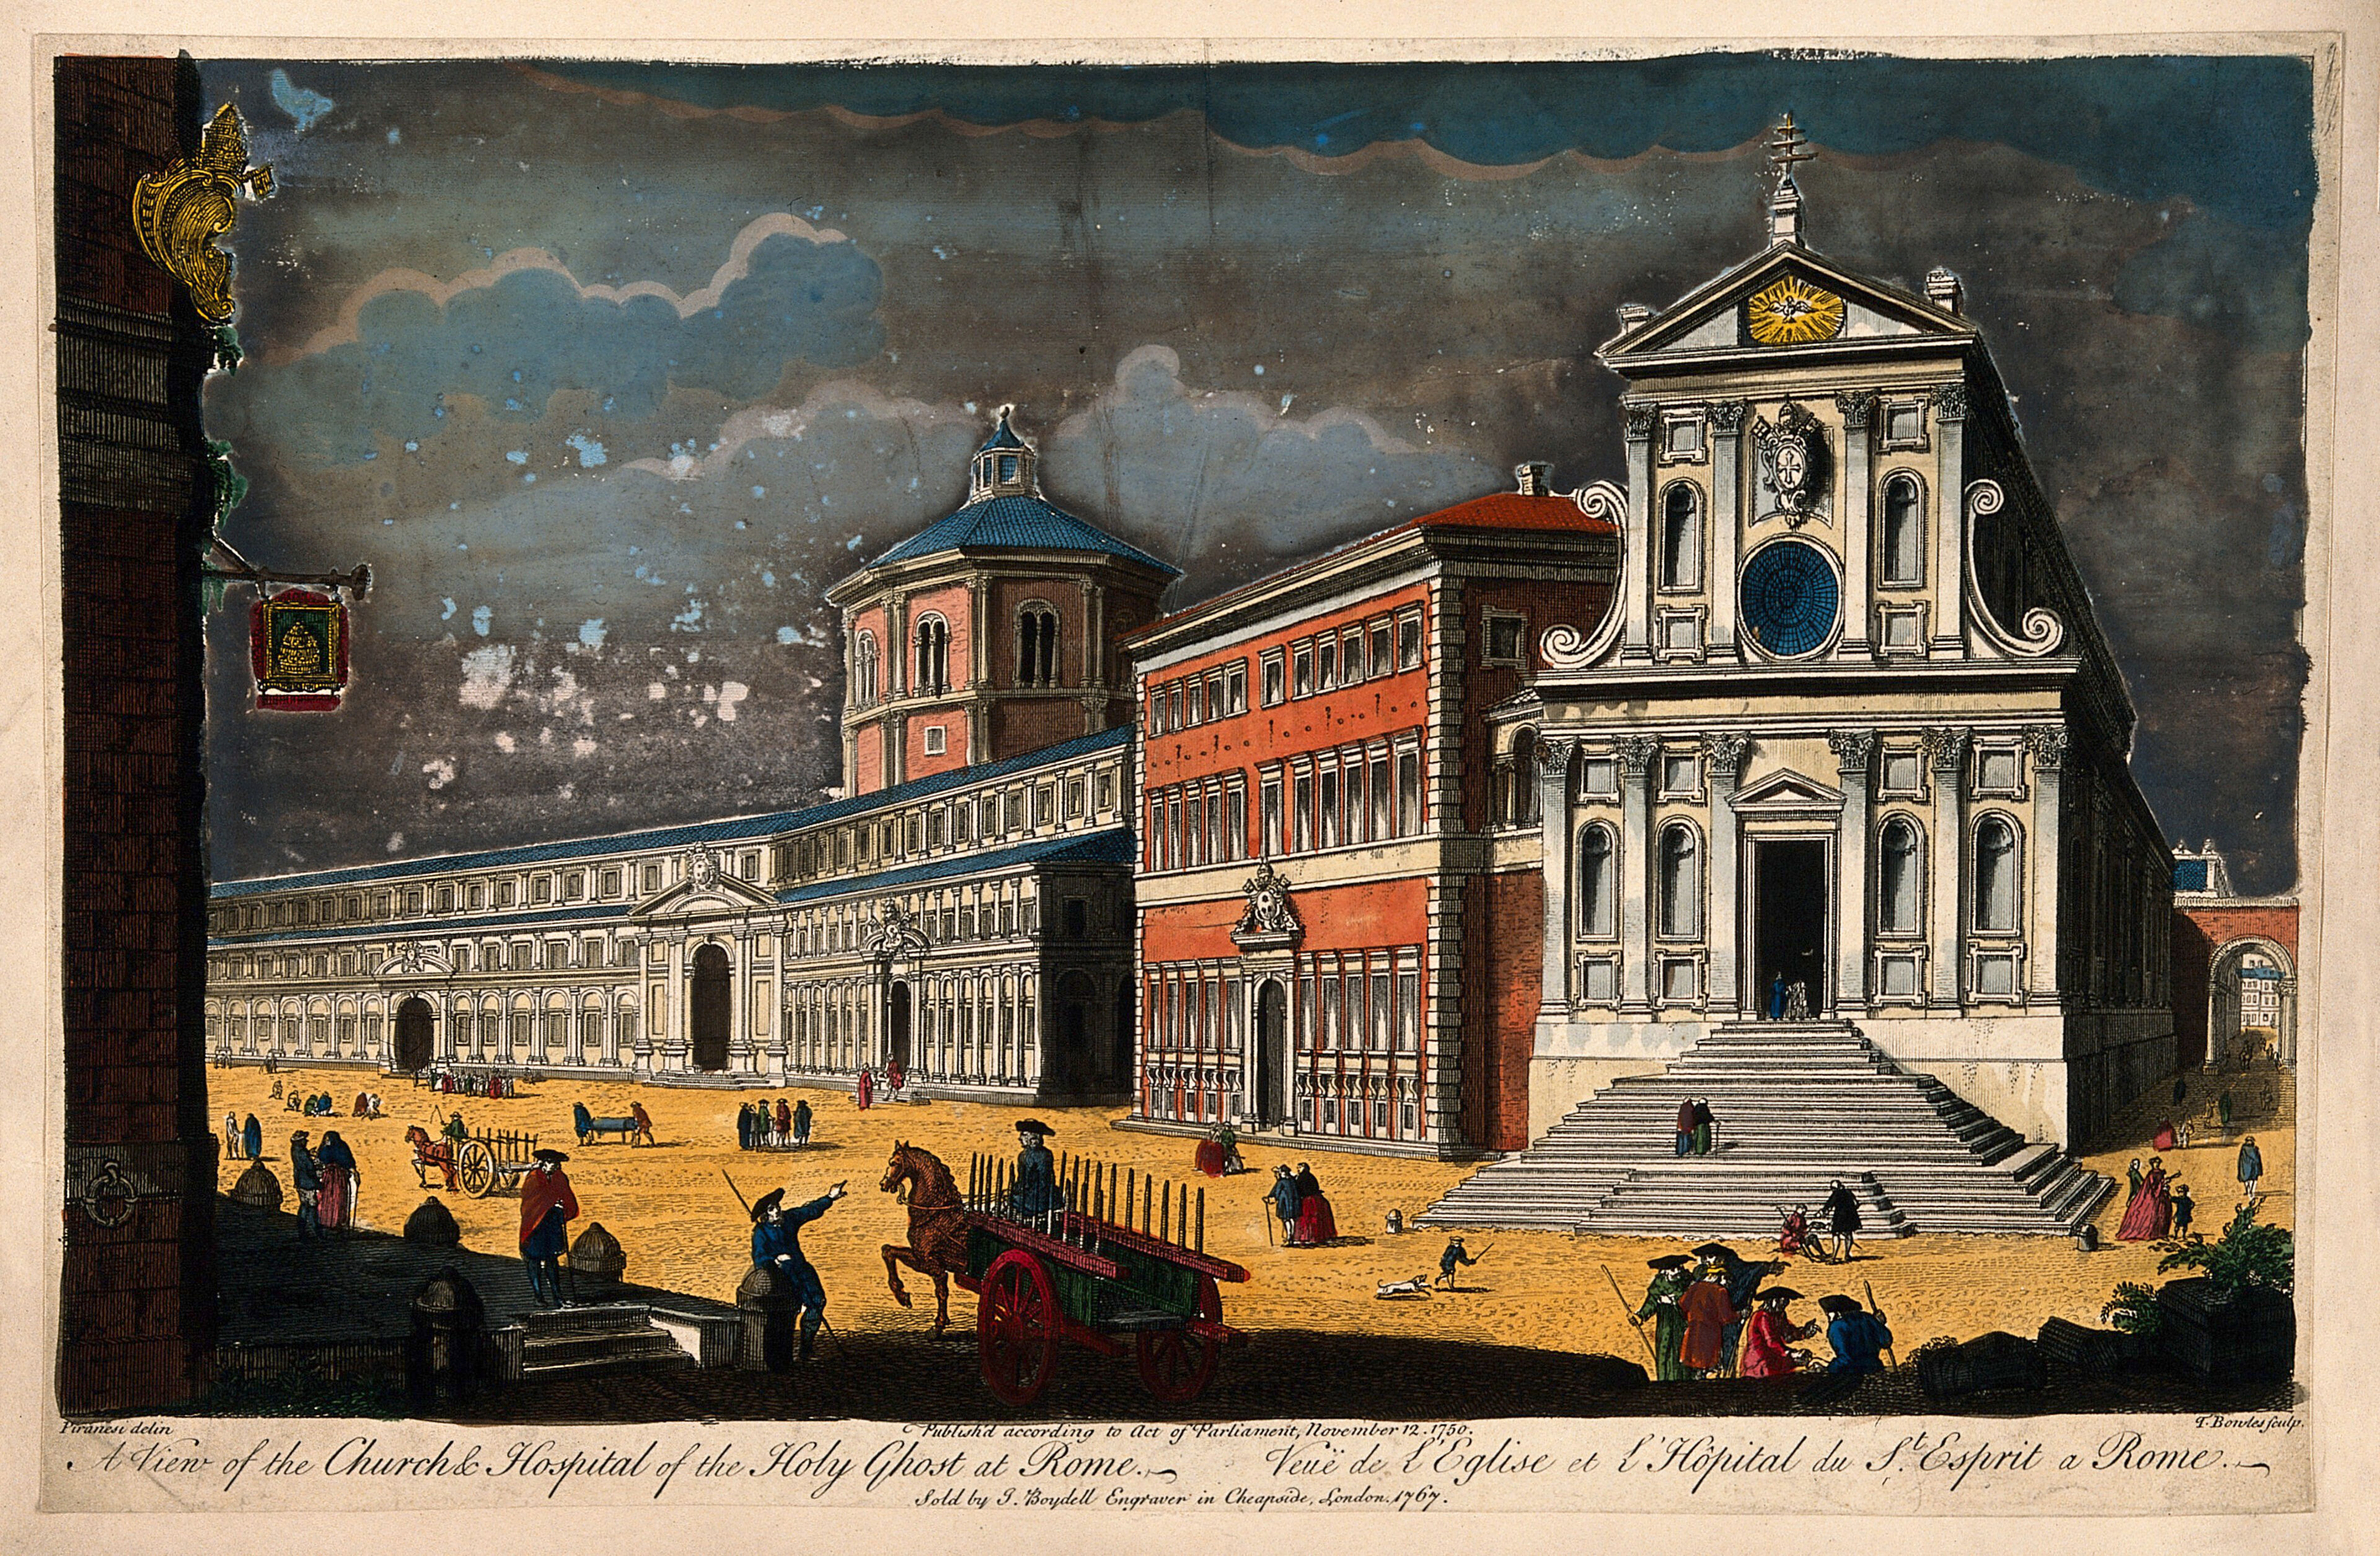 Church and Hospital of Santo Spirito in Sassia, Rome: panoramic views. Coloured engraving by T. Bowles, 1750, after G.B. Piranesi.